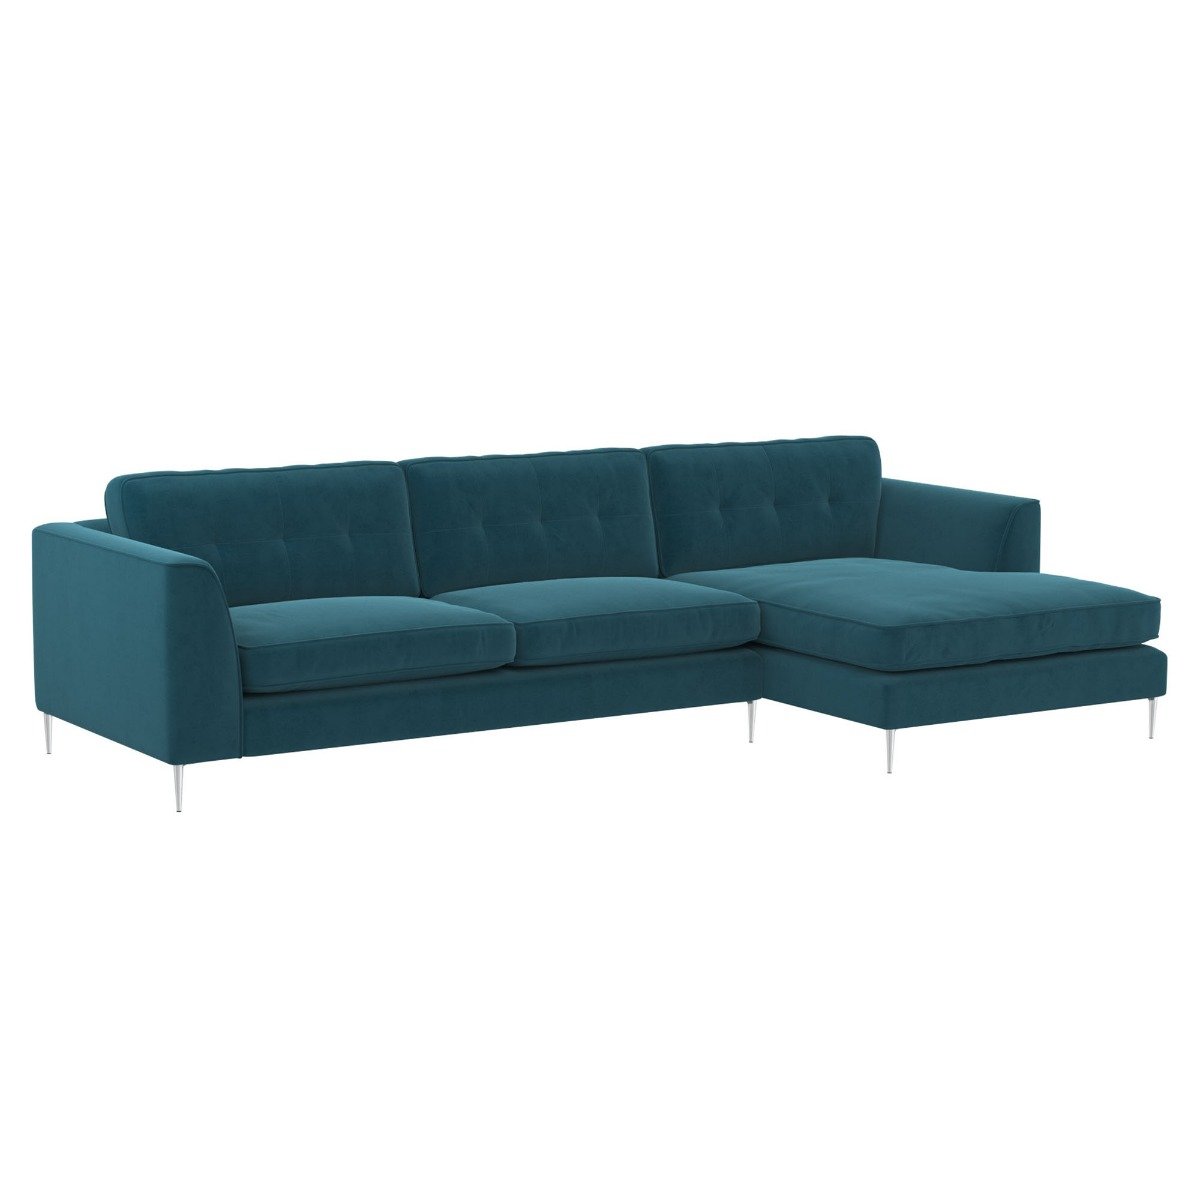 Conza Large Chaise Corner Sofa Right, Teal Fabric | Barker & Stonehouse